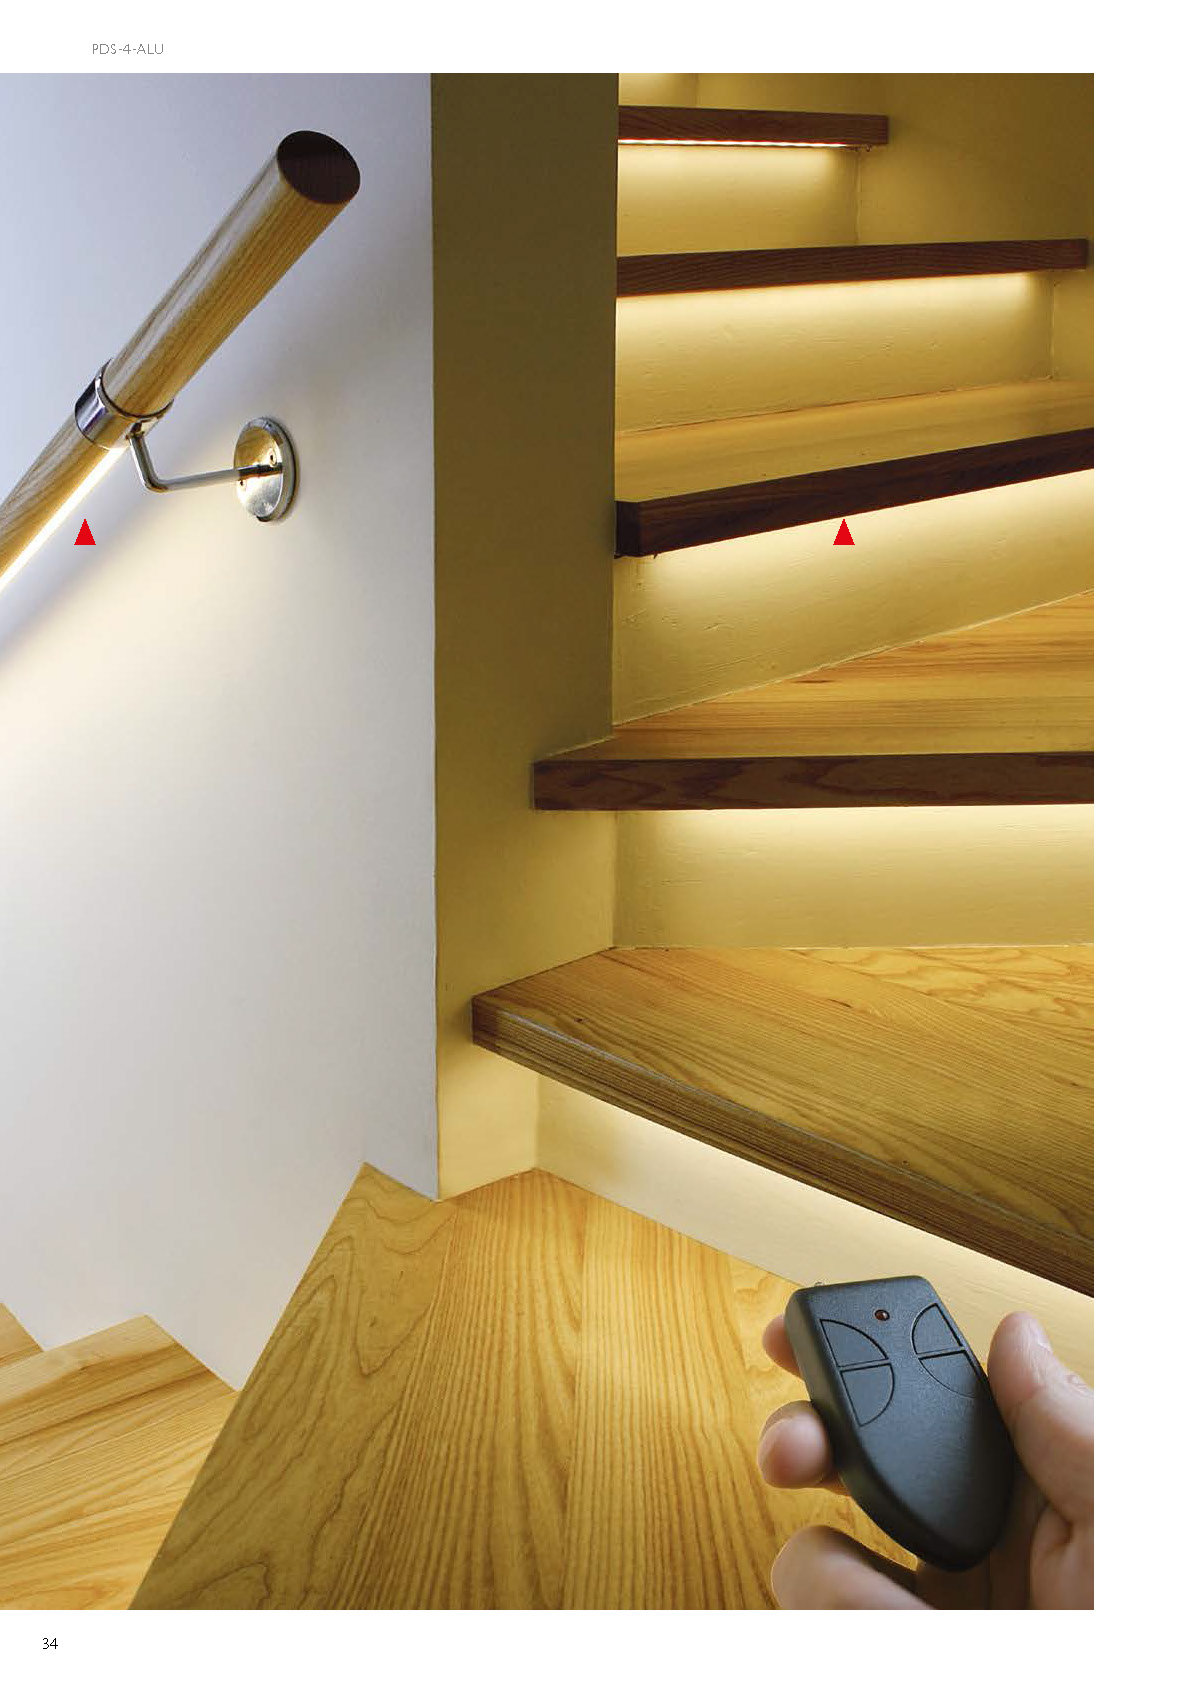 PDS4, profile | stair-lighting.com, B1718 profile, PDS4 klus profile, PDS4 channel, 